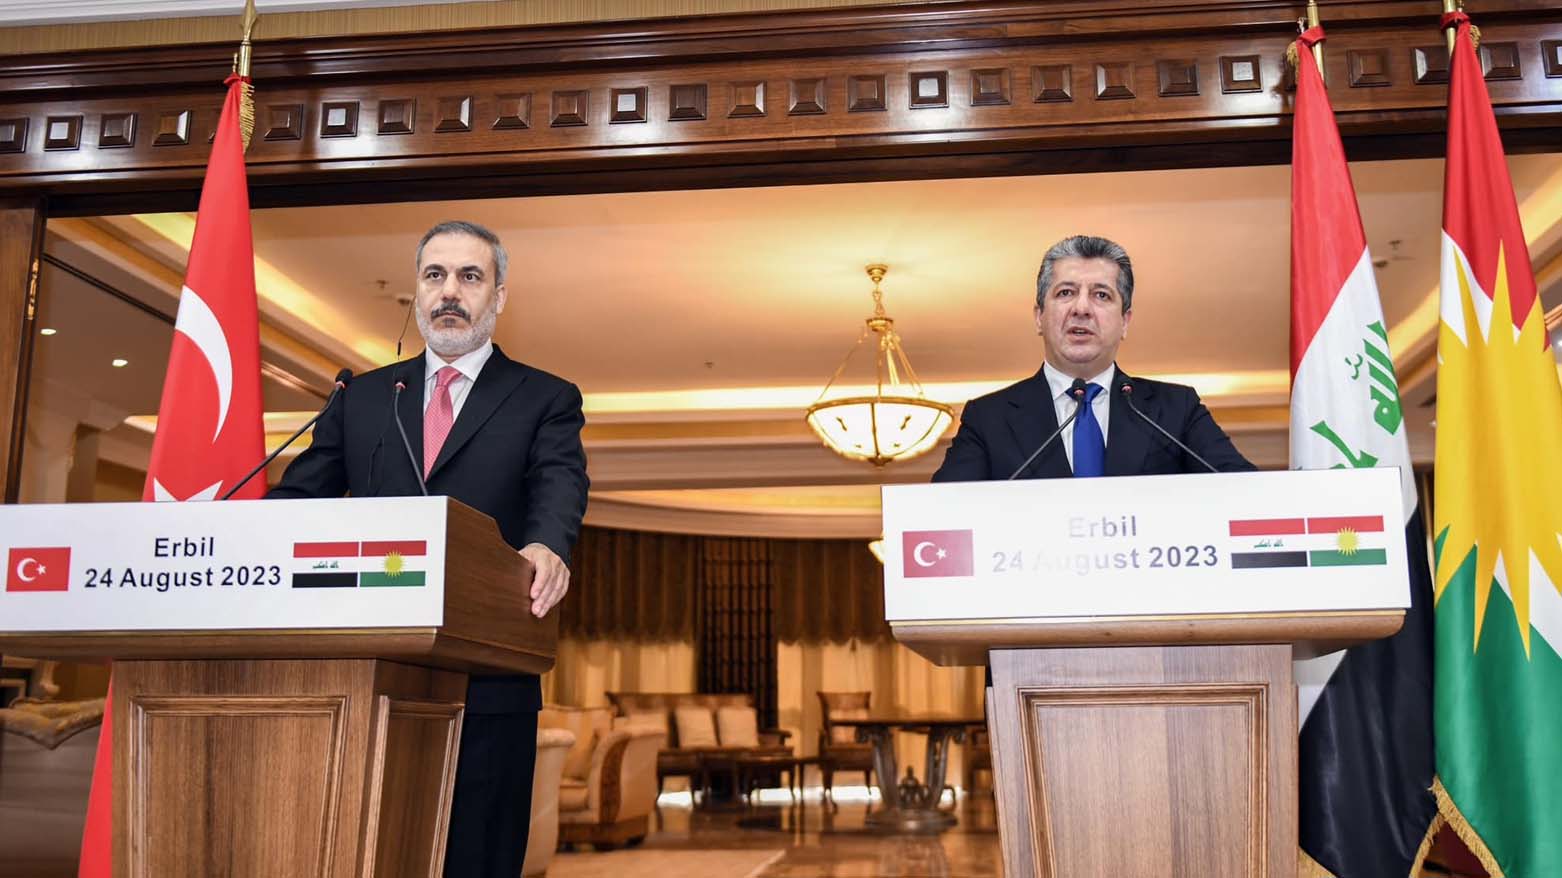 Kurdistan Region Prime Minister Masrour Barzani (right) is pictured during a joint presser with Turkish Minister of Foreign Affairs Hakan Fidan in Erbil, August 24, 2023. (Photo: KRG)